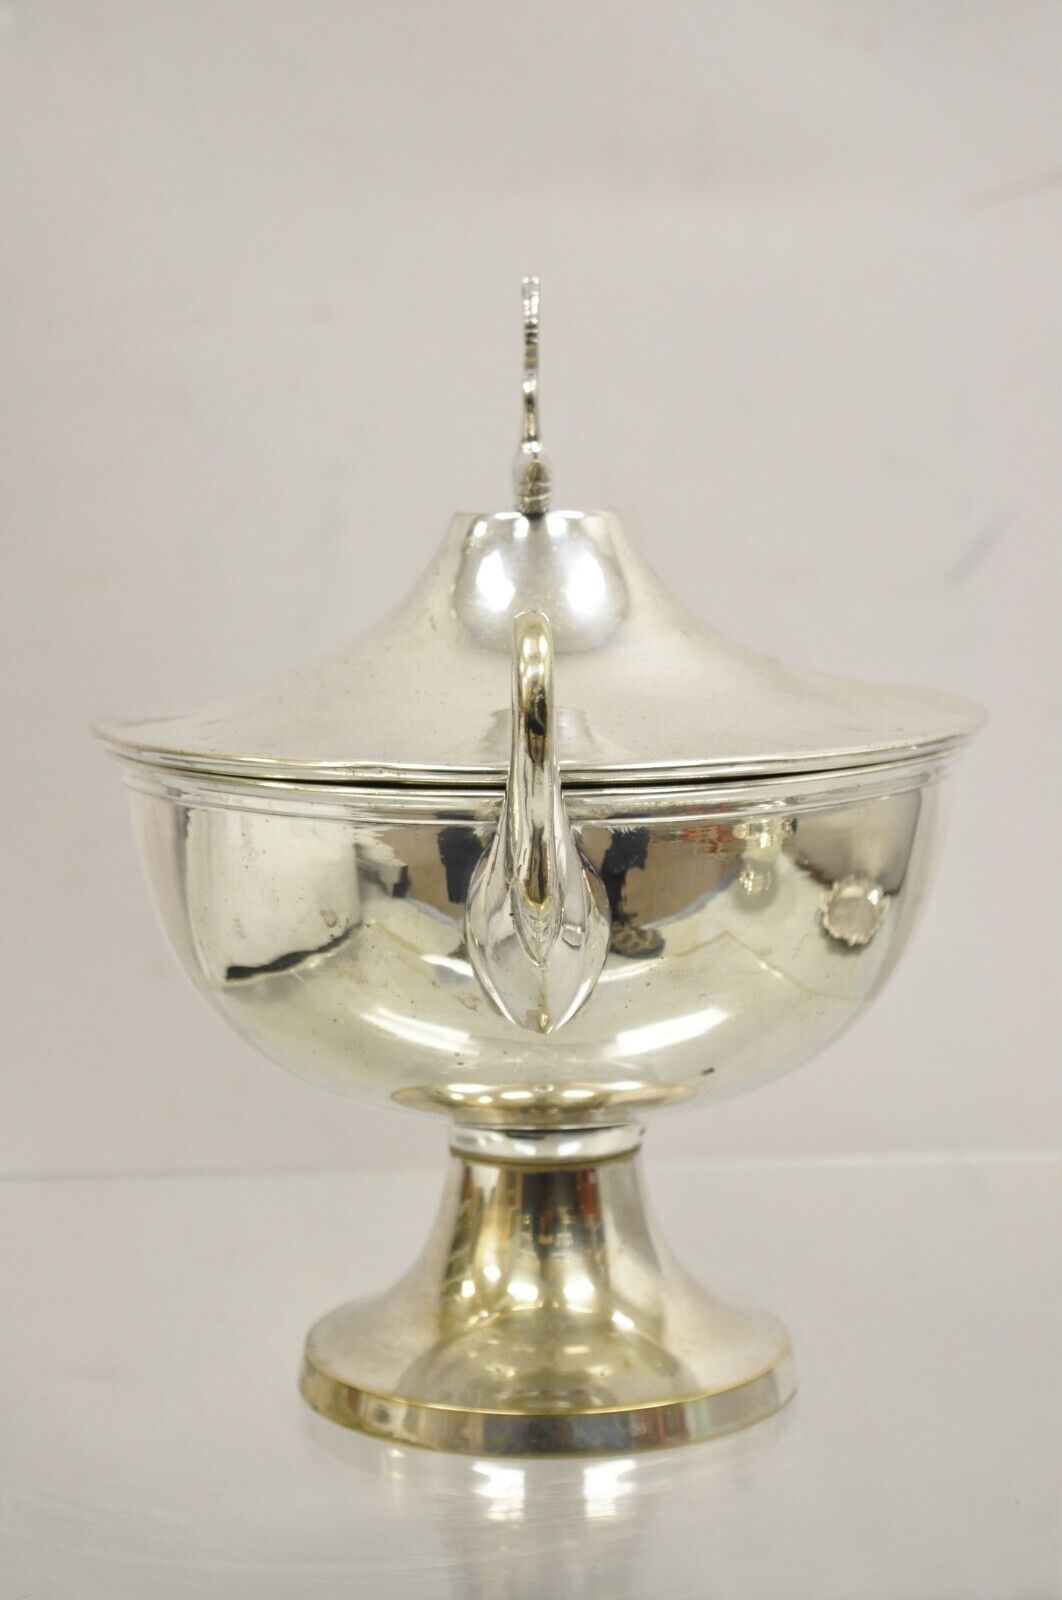 Vintage Loving Swans Victorian Style Silver Plated Covered Lidded Soup Tureen